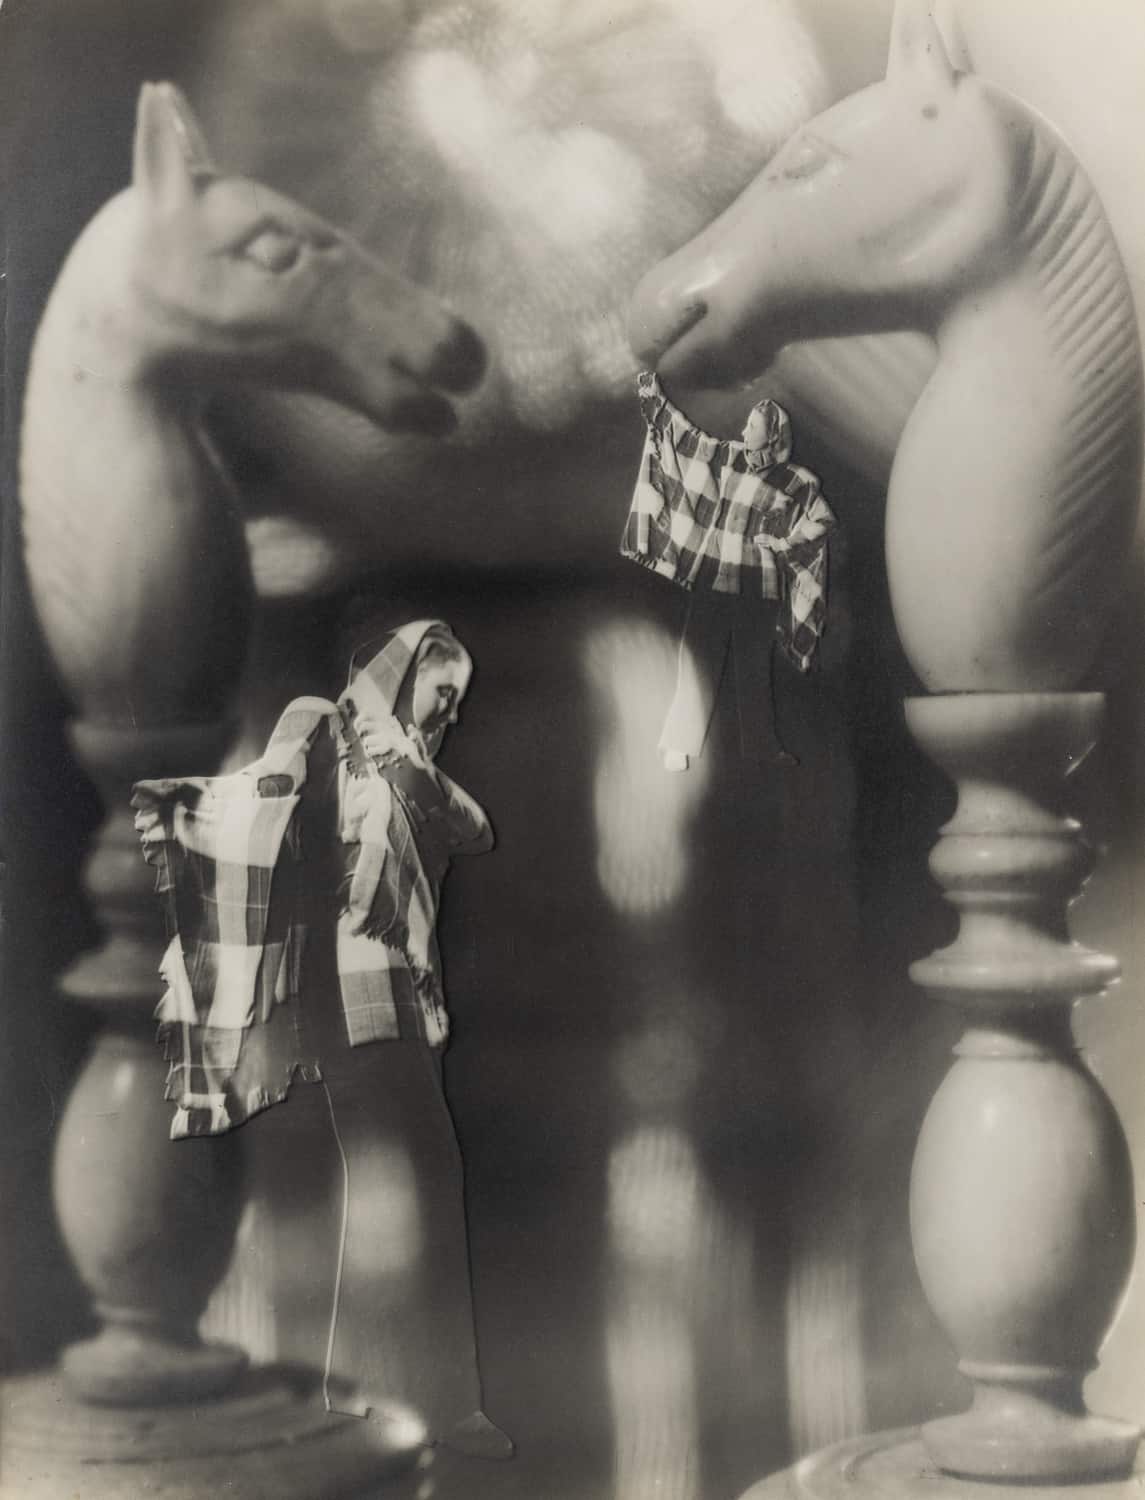 François Kollar, Photomontage with Chess Pieces and Woman, 1946. Modern Objects, Huxley-Parlour Gallery, 3–5 Swallow St, London, W1B 4DE